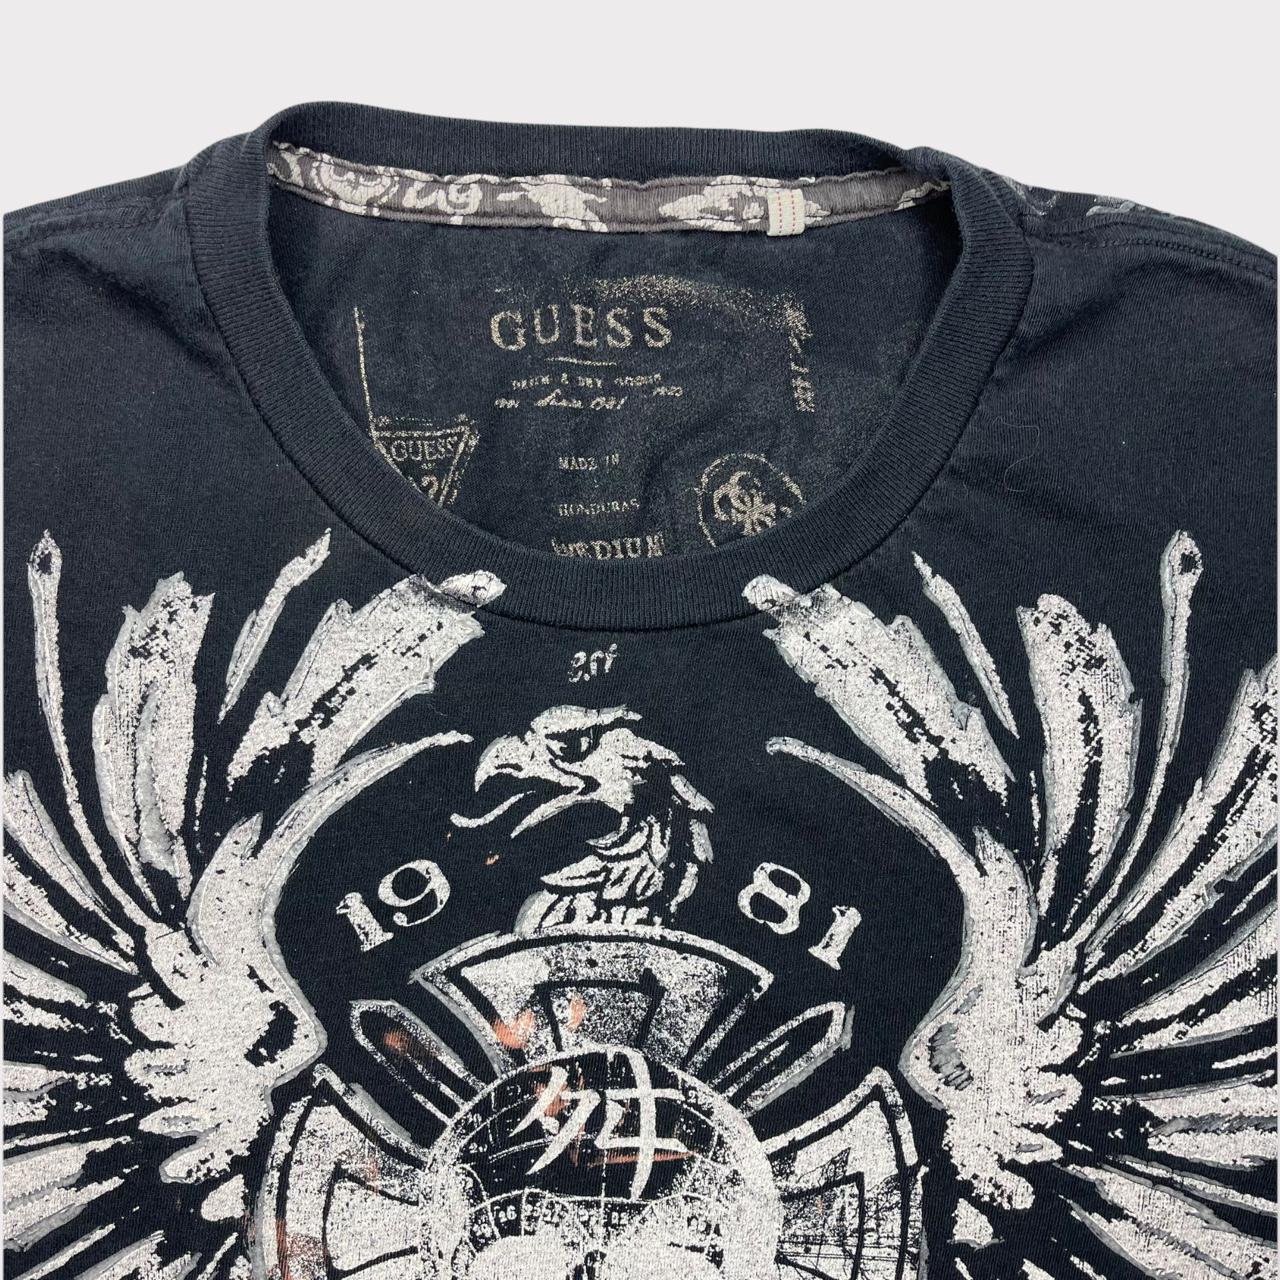 Product Image 2 - ❦ gothic guess graphic tee